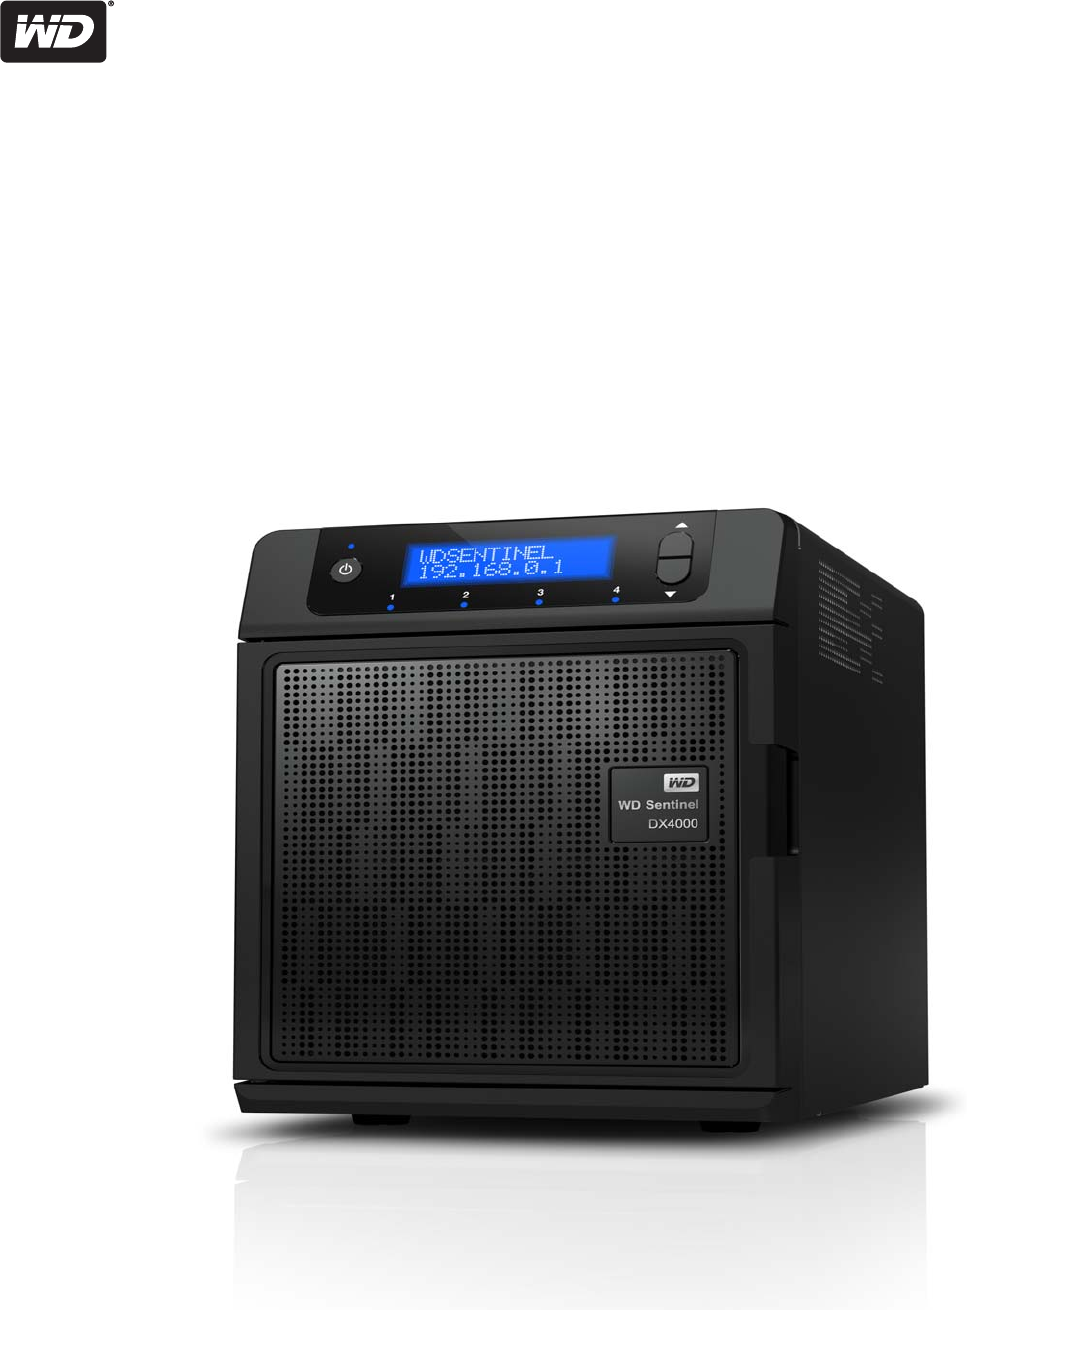 wd sentinel dx4000 factory reset iso